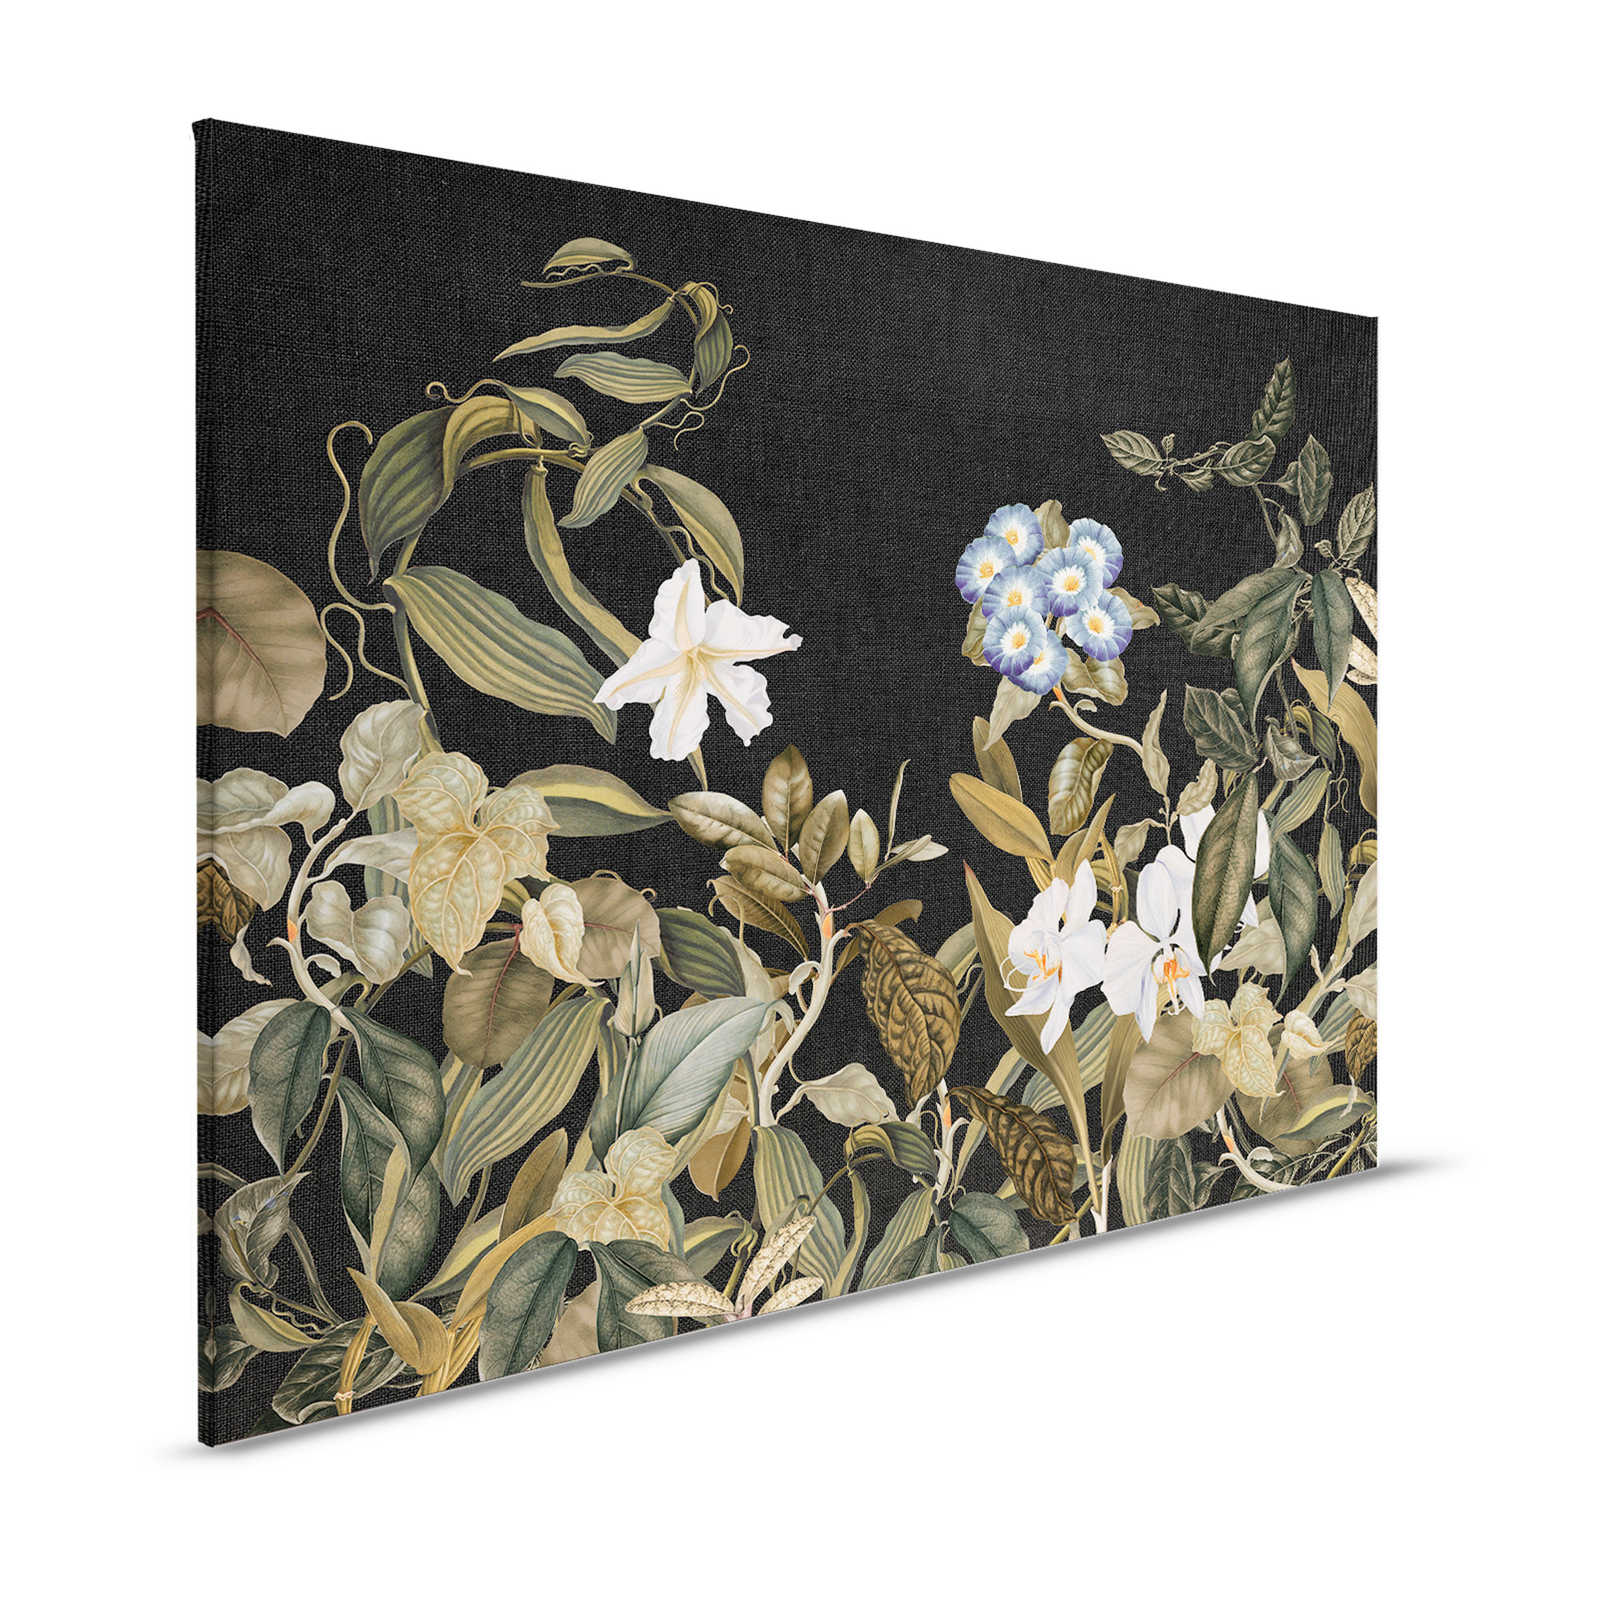 Botanical Canvas Painting with Orchids & Leaves Motif - 1.20 m x 0.80 m
